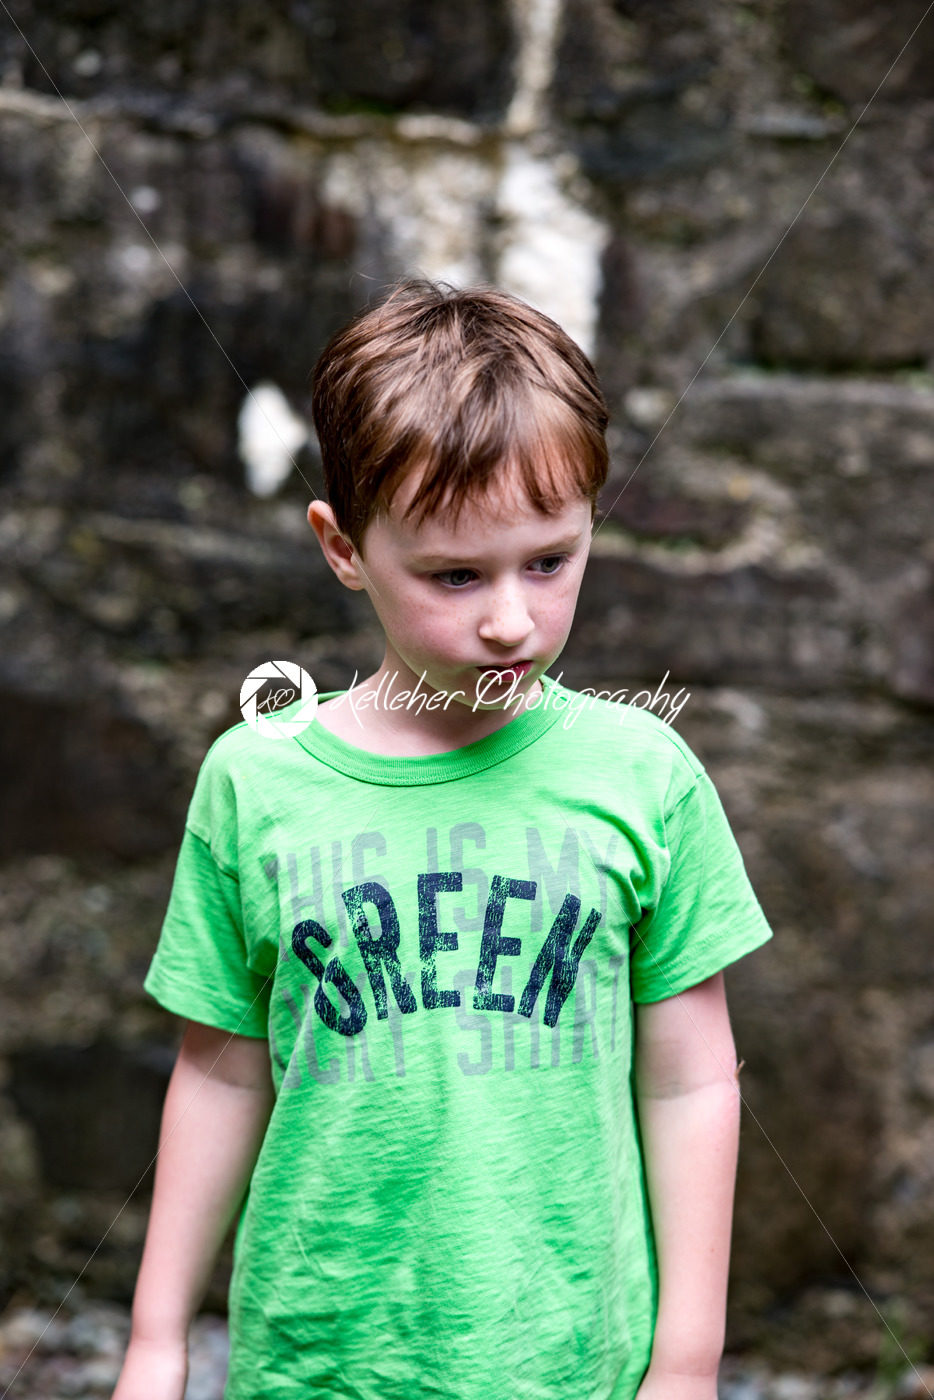 Young little boy portrait looking around inside an old castle - Kelleher Photography Store